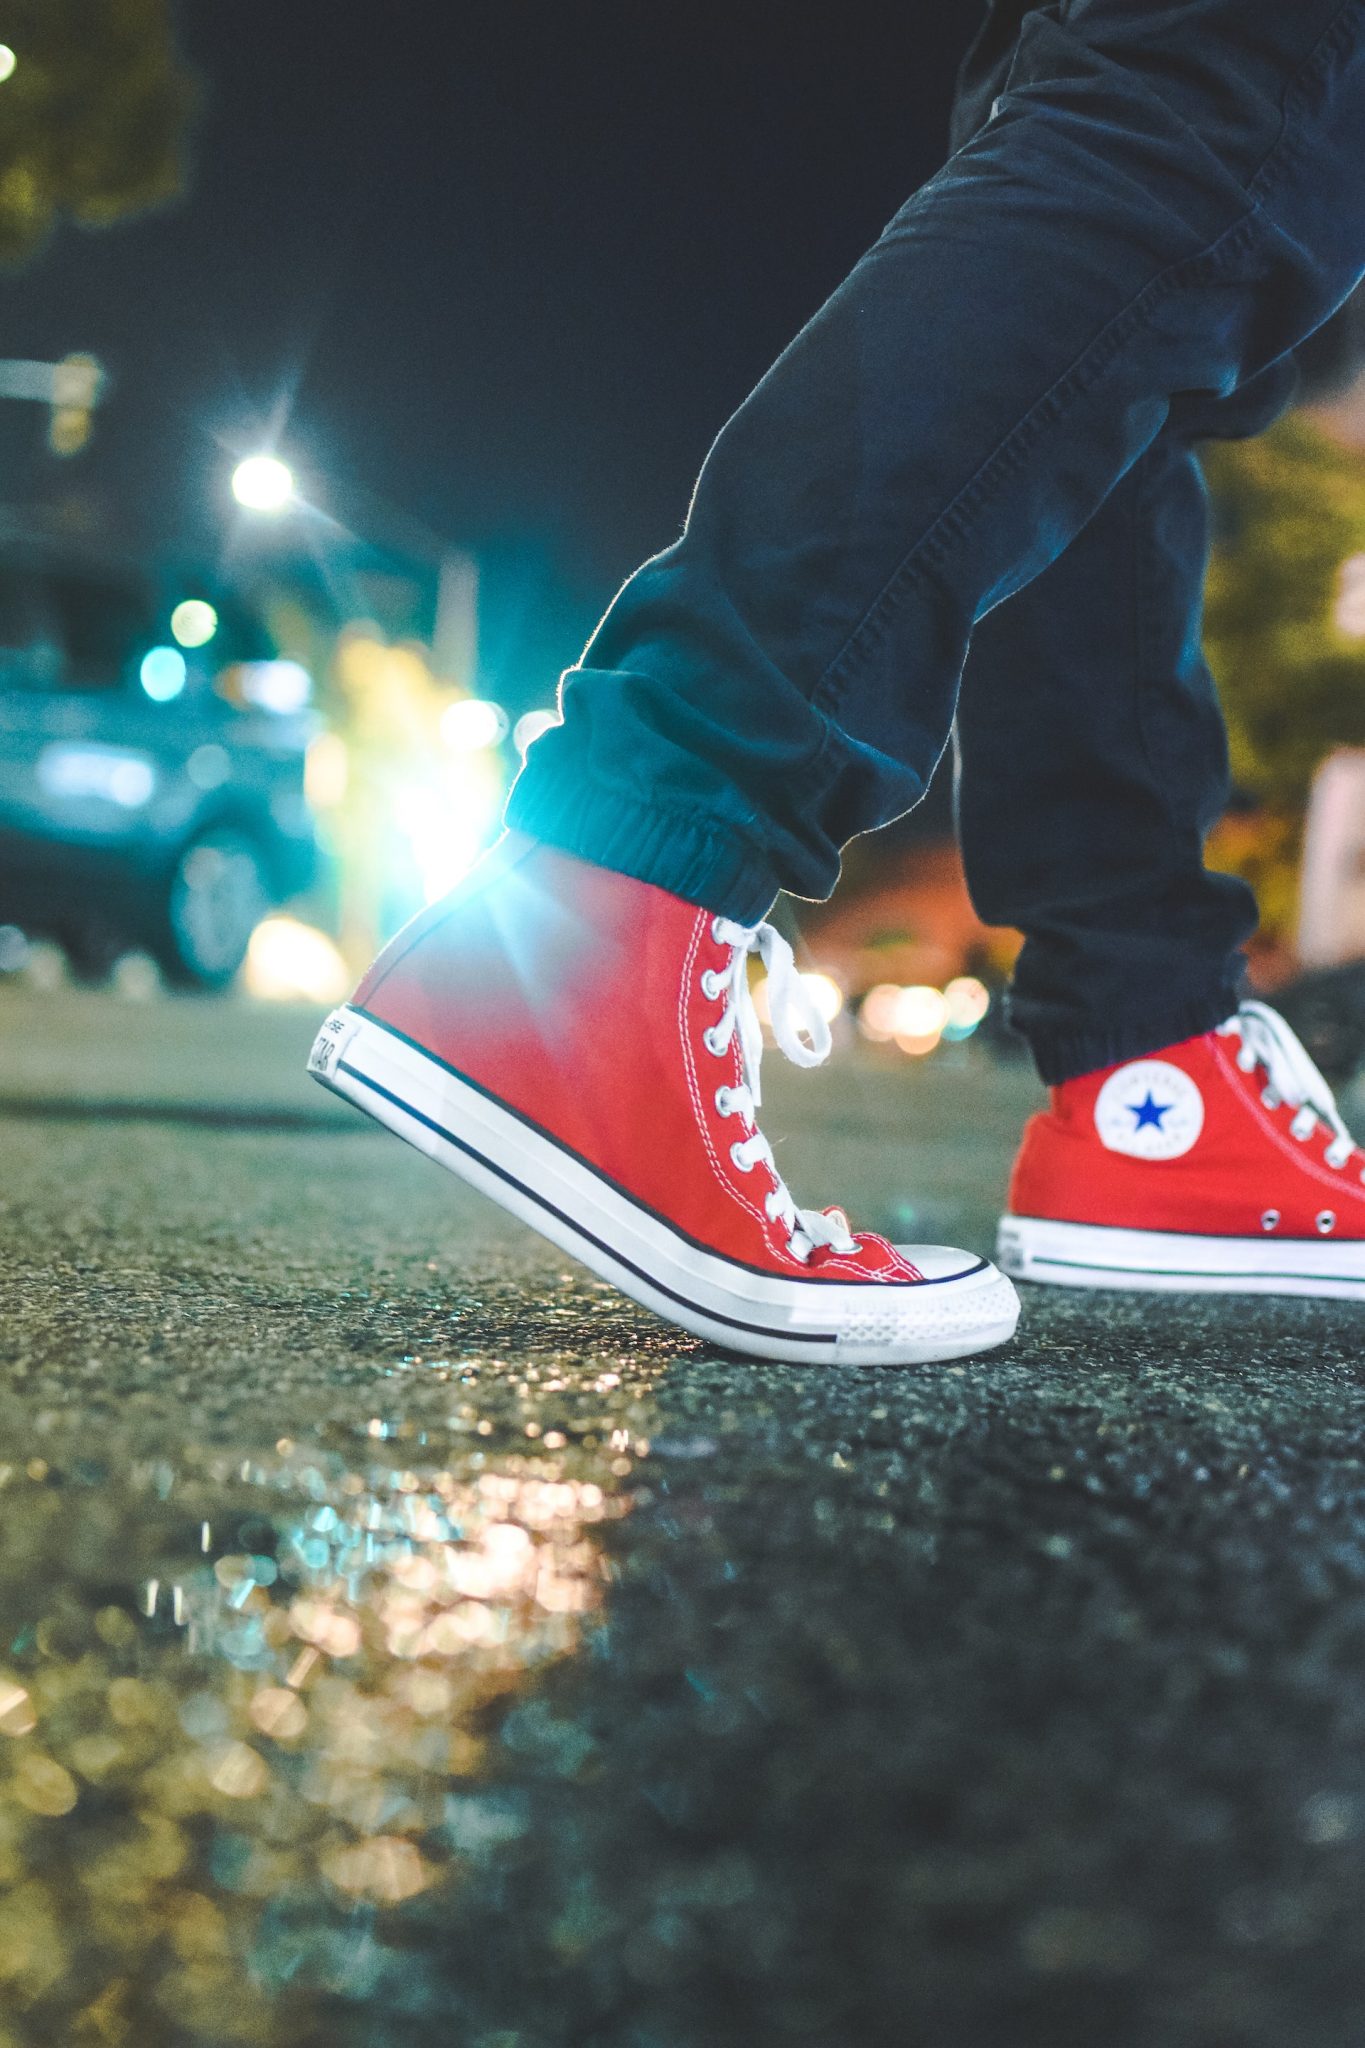 red sneakers walking on a rainy street at night